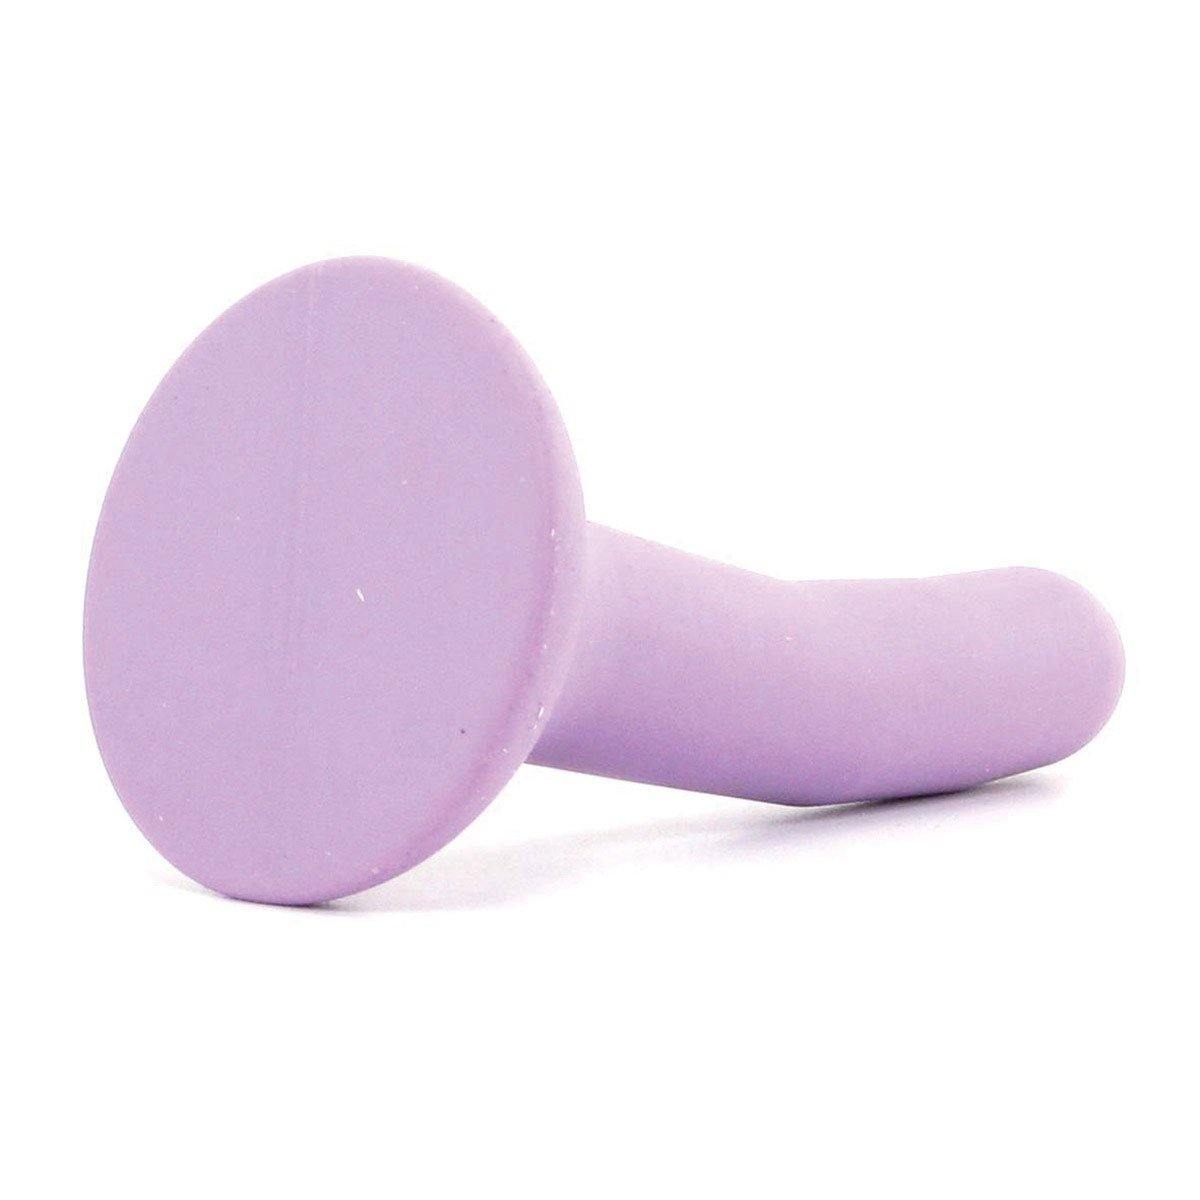 Wet for Her Five Jules - Small - Violet - Buy At Luxury Toy X - Free 3-Day Shipping